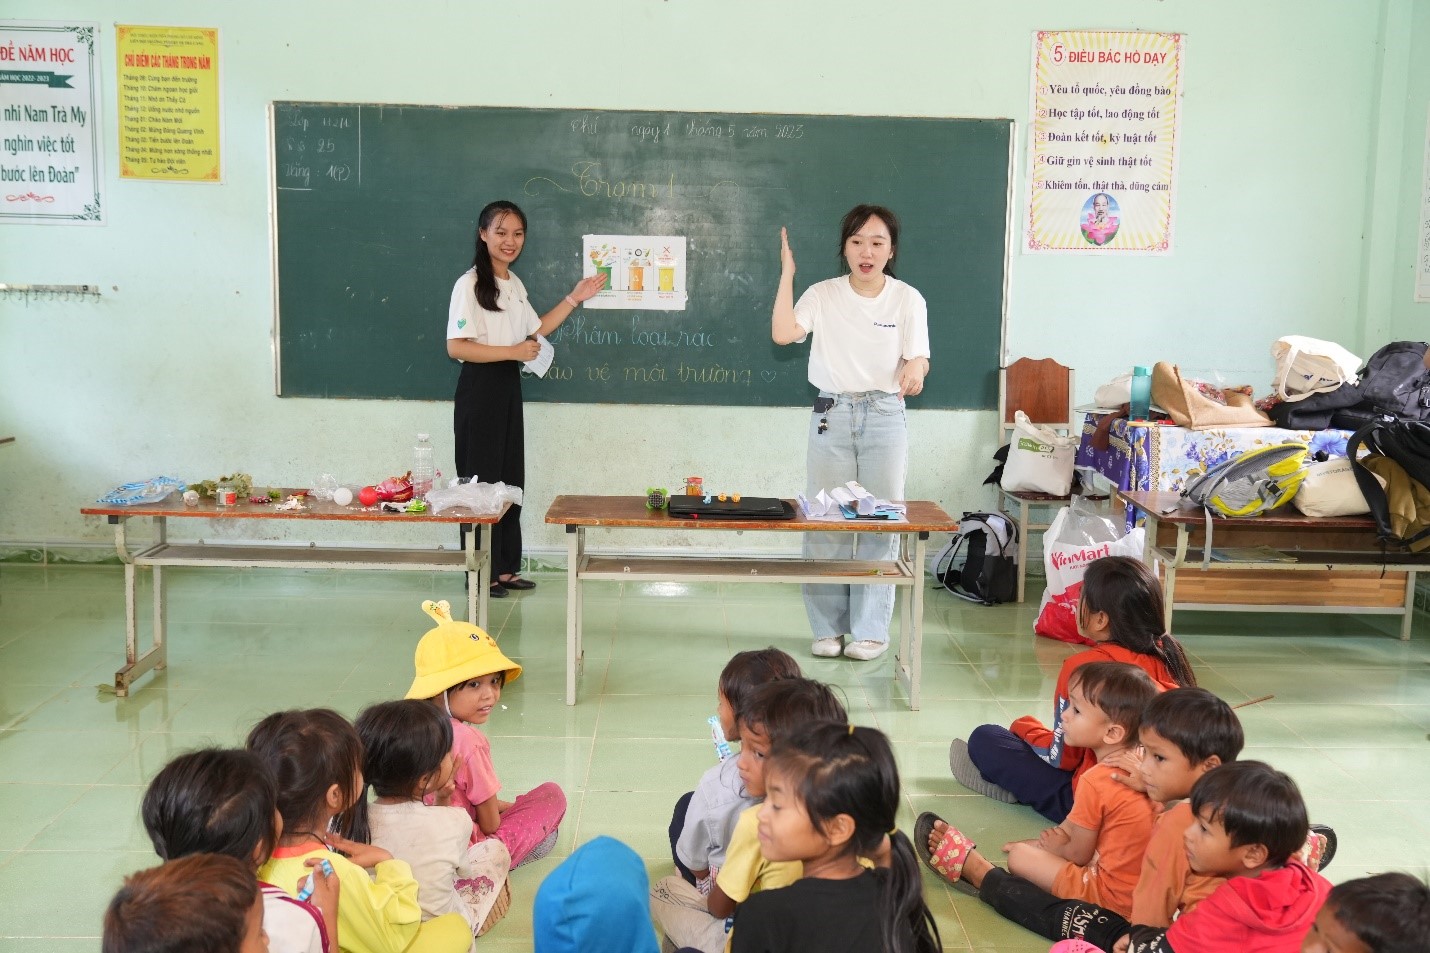 Panasonic, joined by young people, determined in bringing “light” to over 300 disadvantaged households in Nam Tra My district, Quang Nam province 